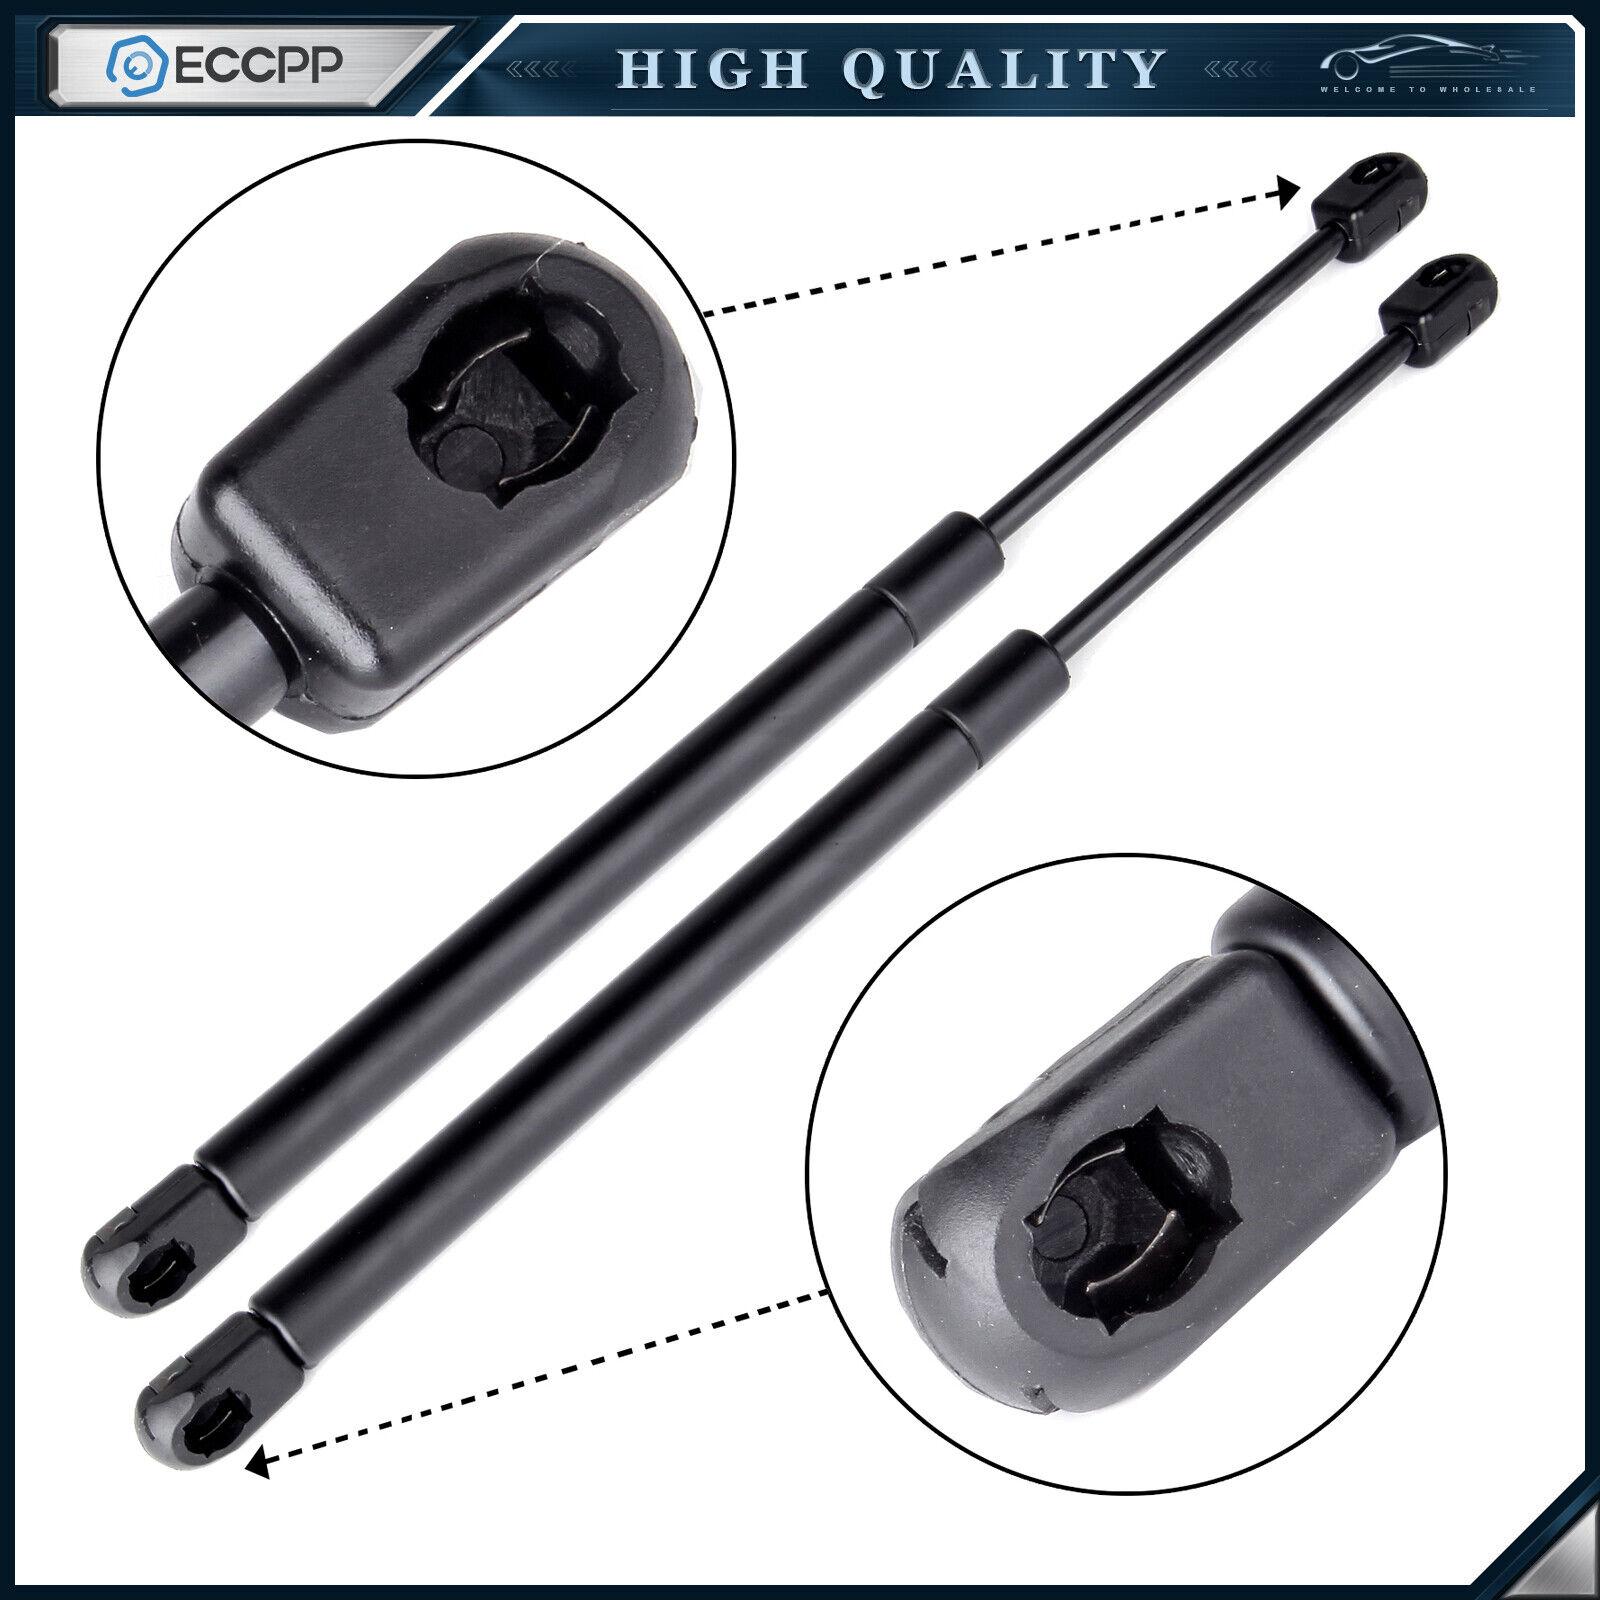 ECCPP 2x Hood Lift Supports Gas Springs For Acura TL 99-01/Acura CL 2001-03 6322